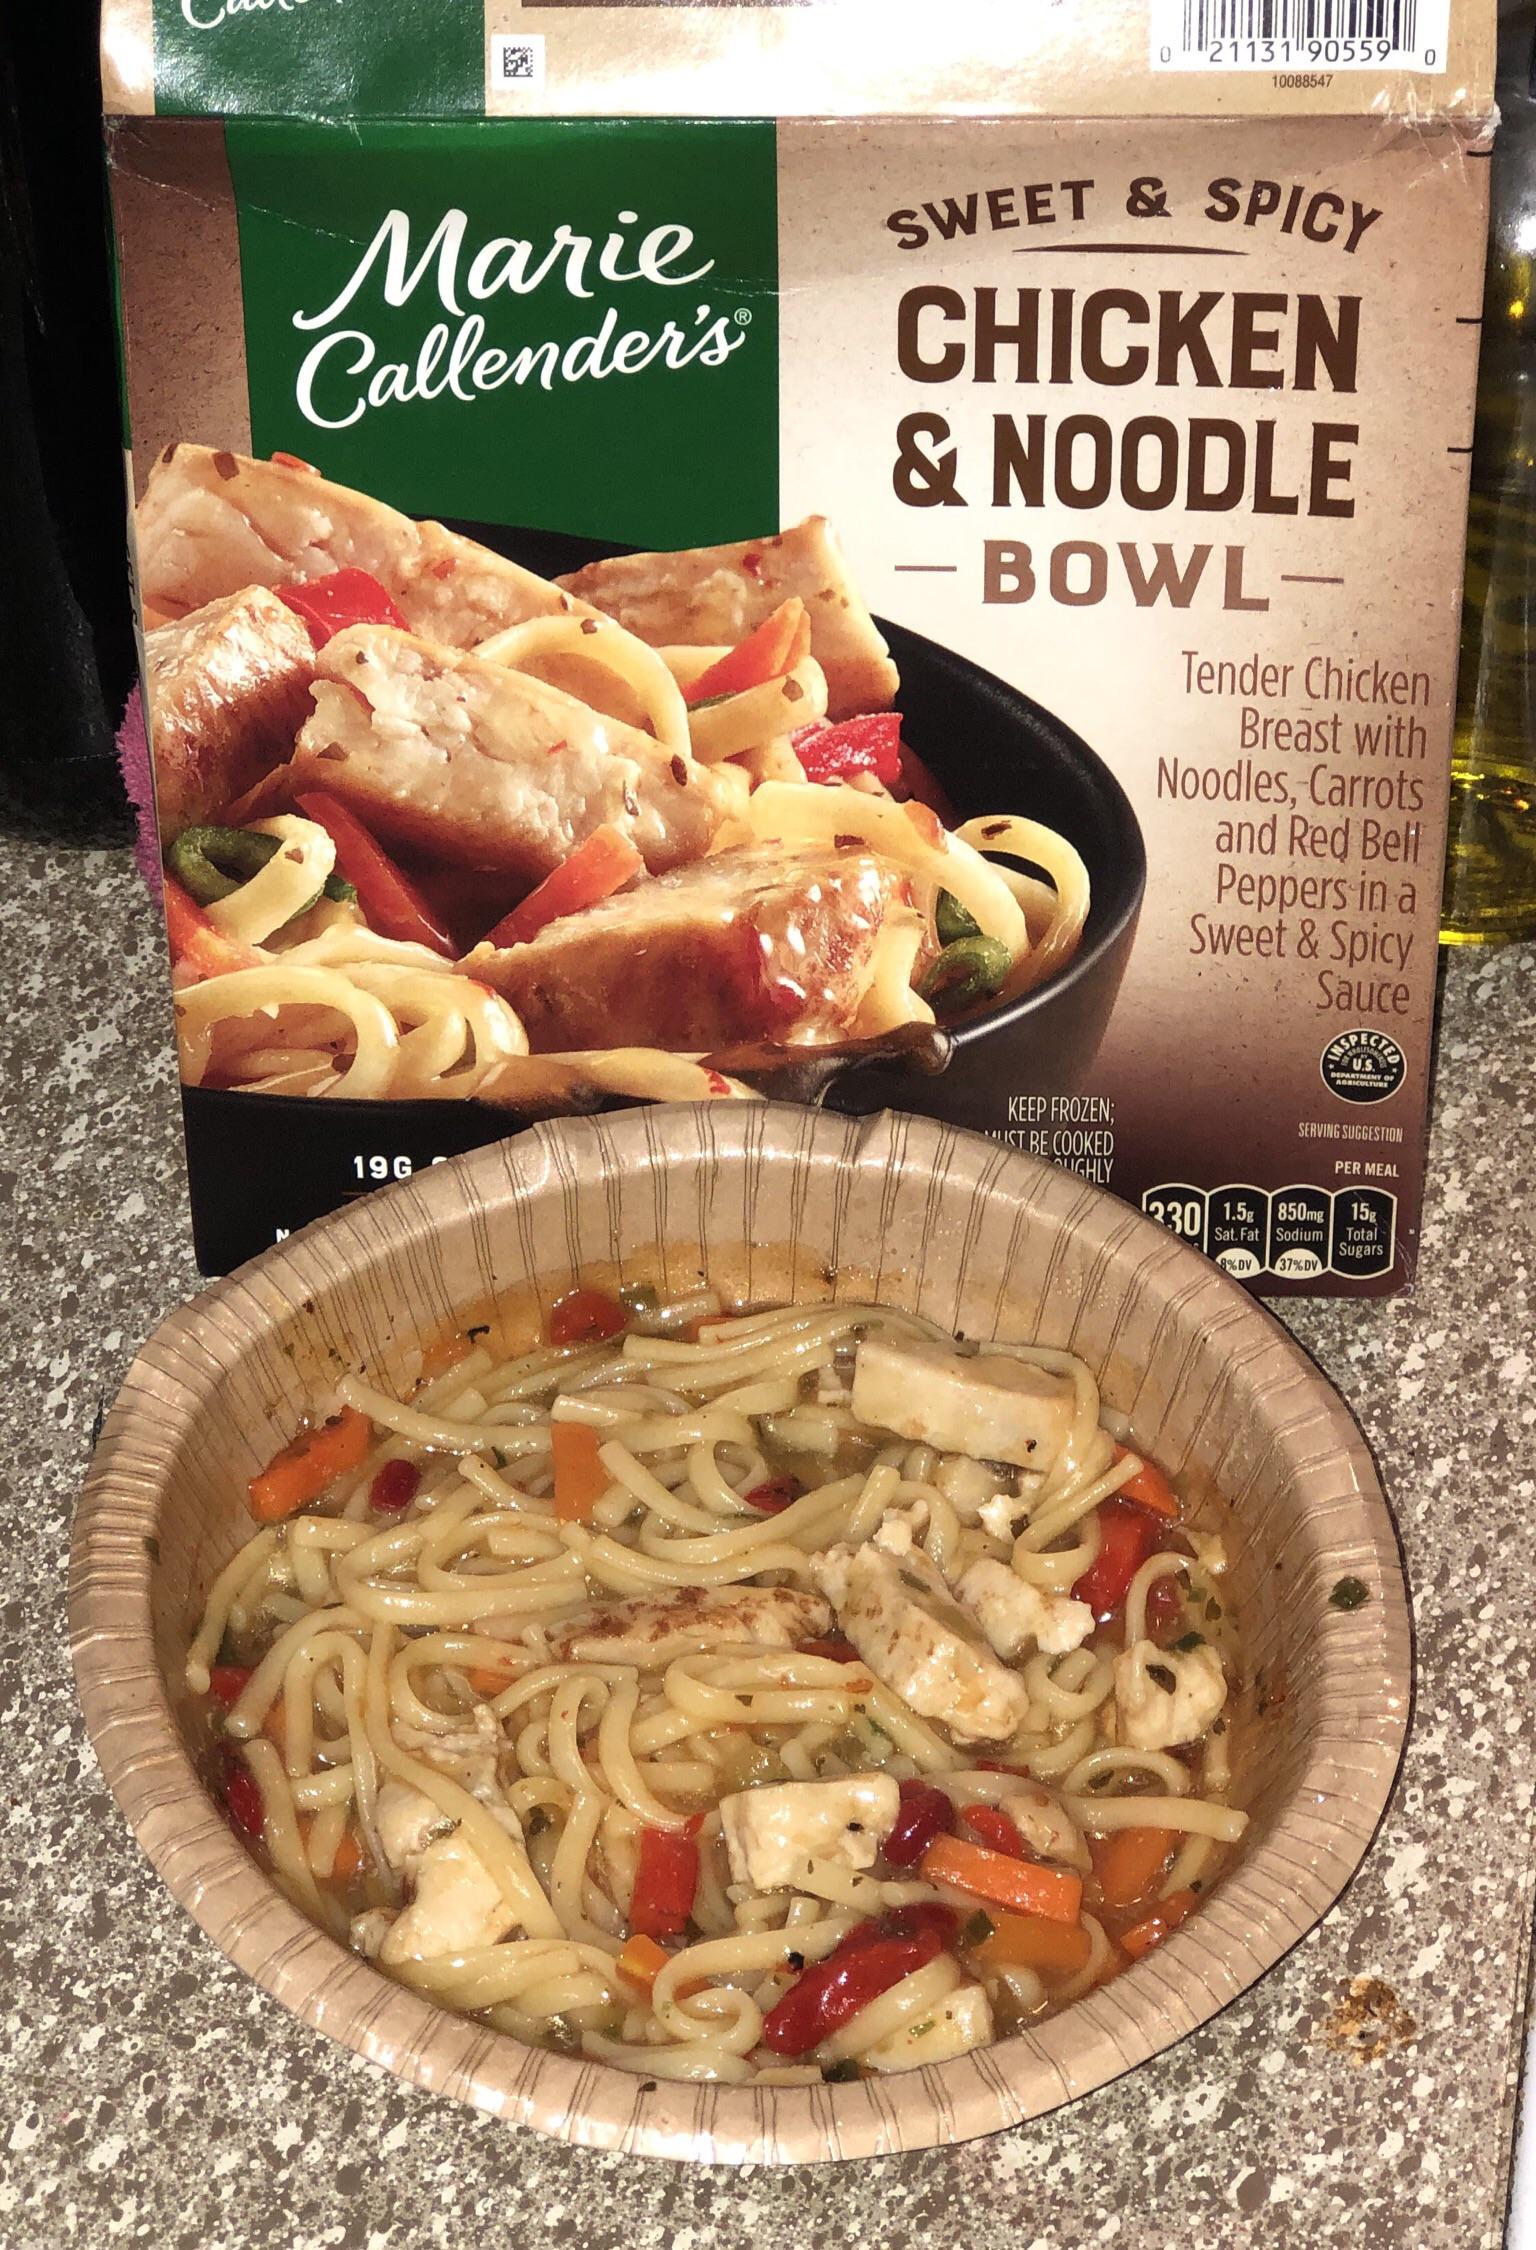 dish - Marie Callender's Sweet & Spicy Chicken & Noodle Bowl Tender Chicken Breast with Noodles, Carrots and Red Beif Peppers in a Sweet & Spicy Sauce